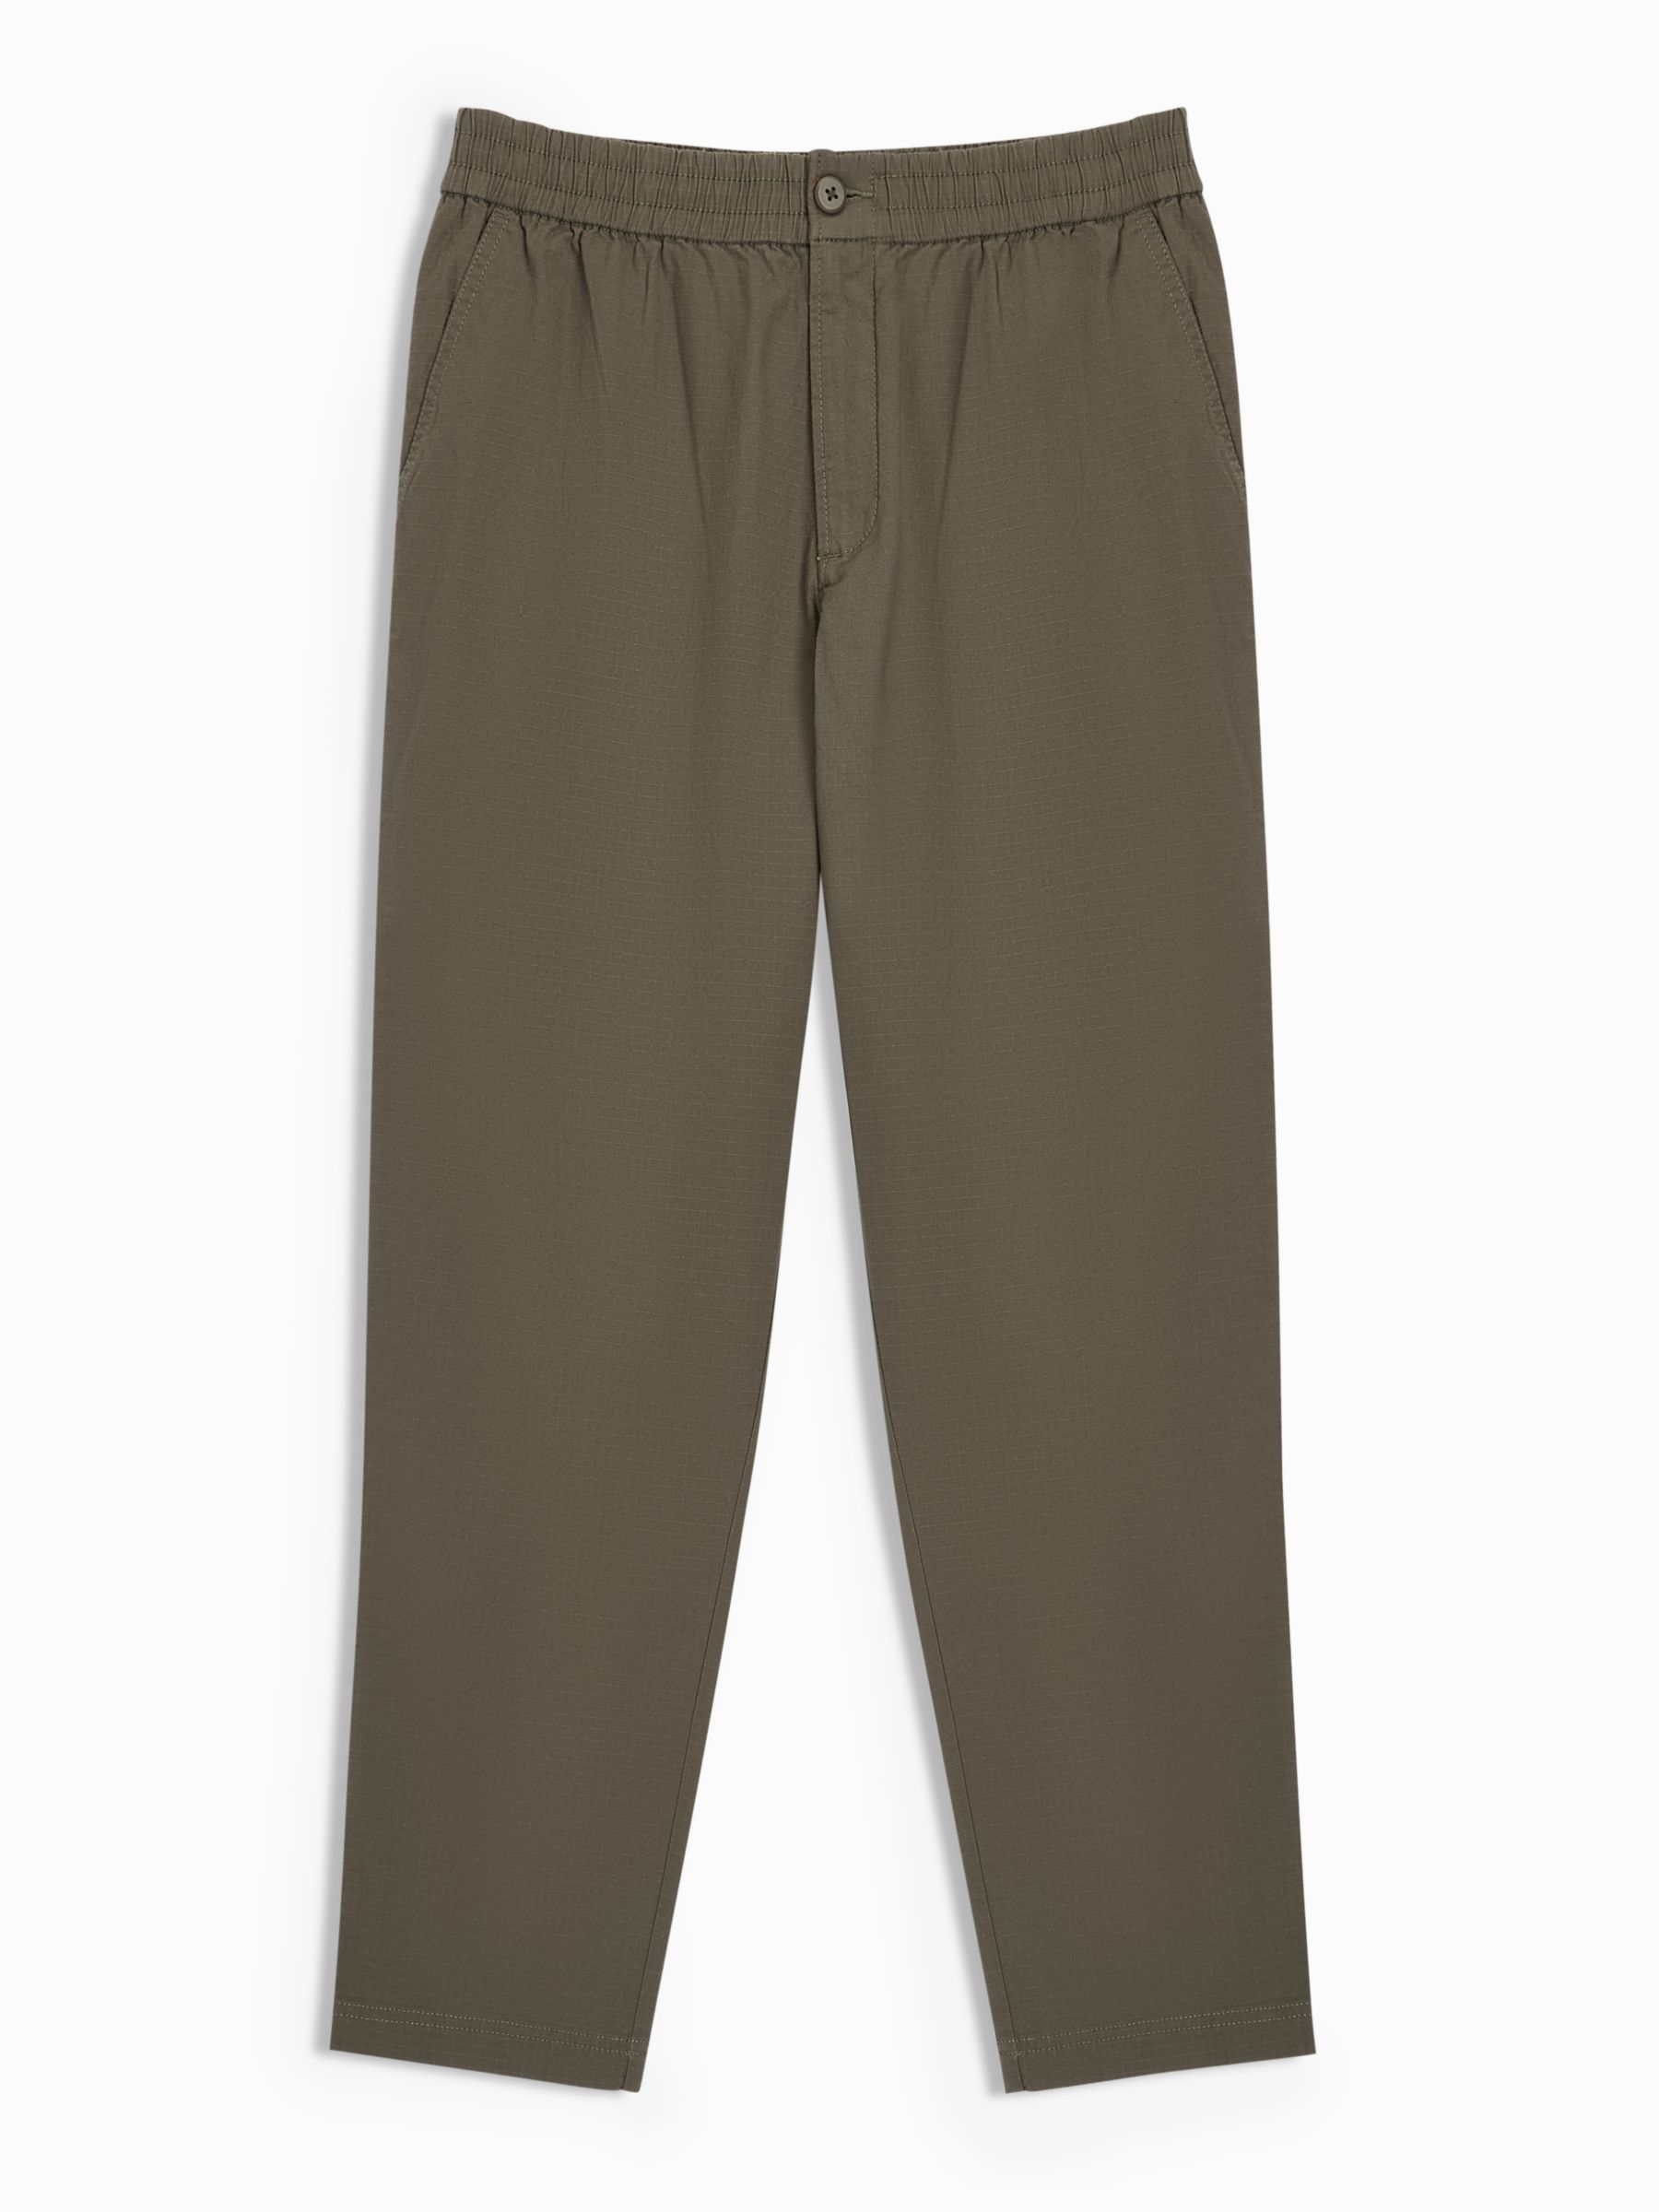 John Lewis ANYDAY Relaxed Fit Ripstop Stretch Cotton Ankle Trousers, Khaki